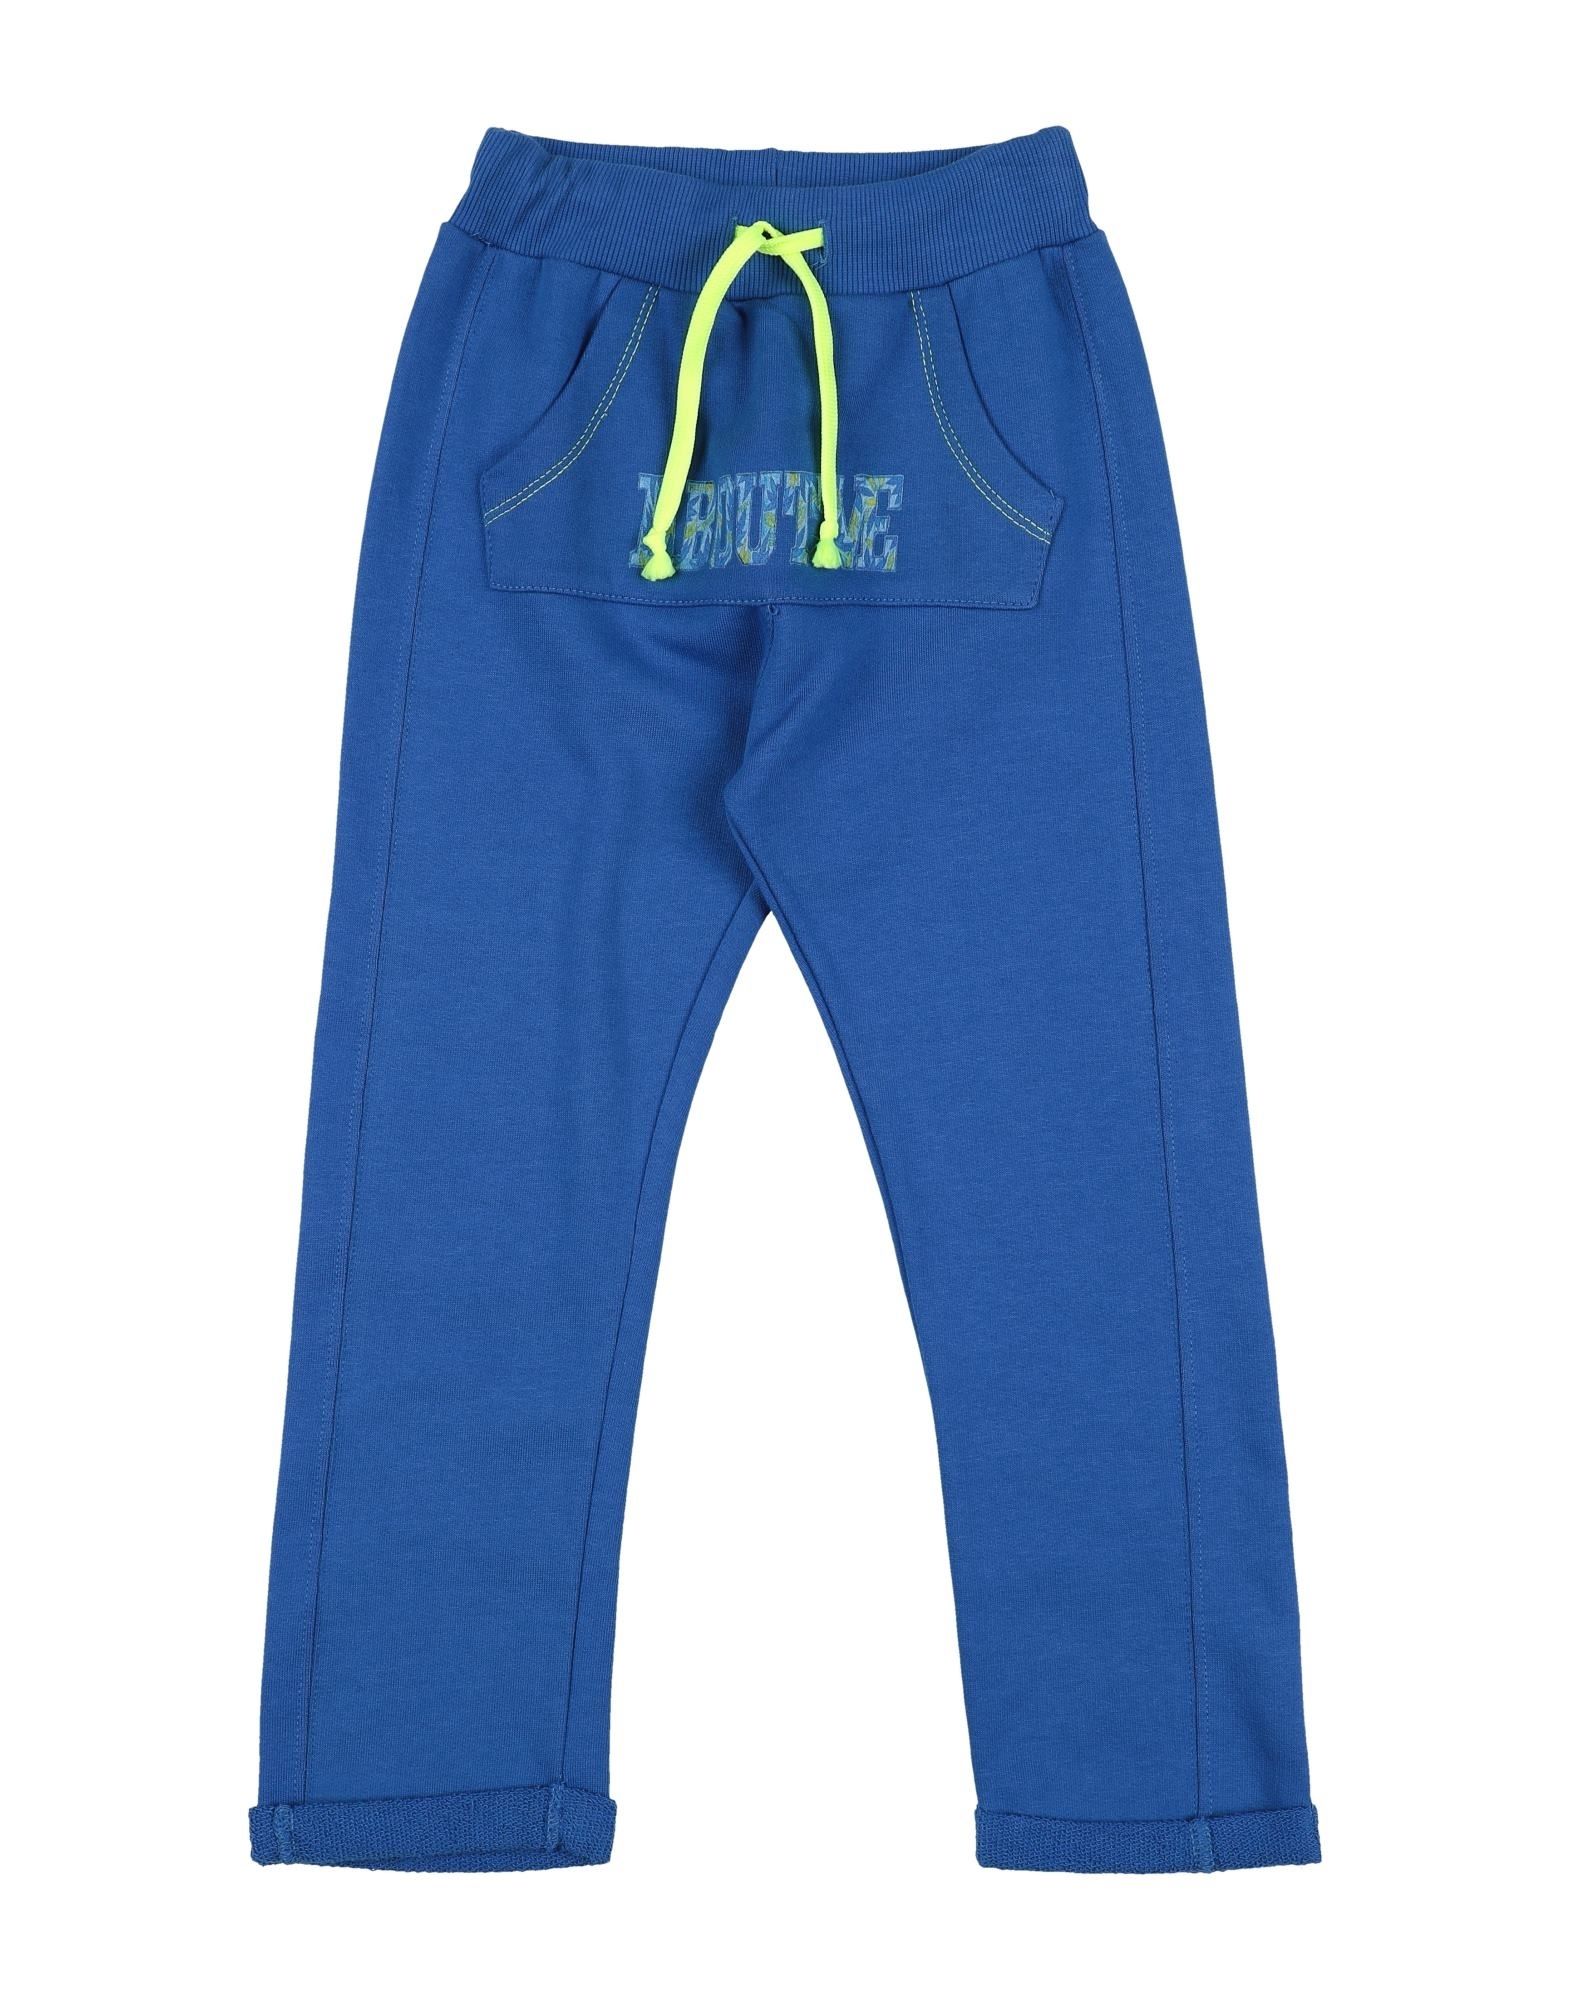 About Me Handmade Kids' Pants In Azure